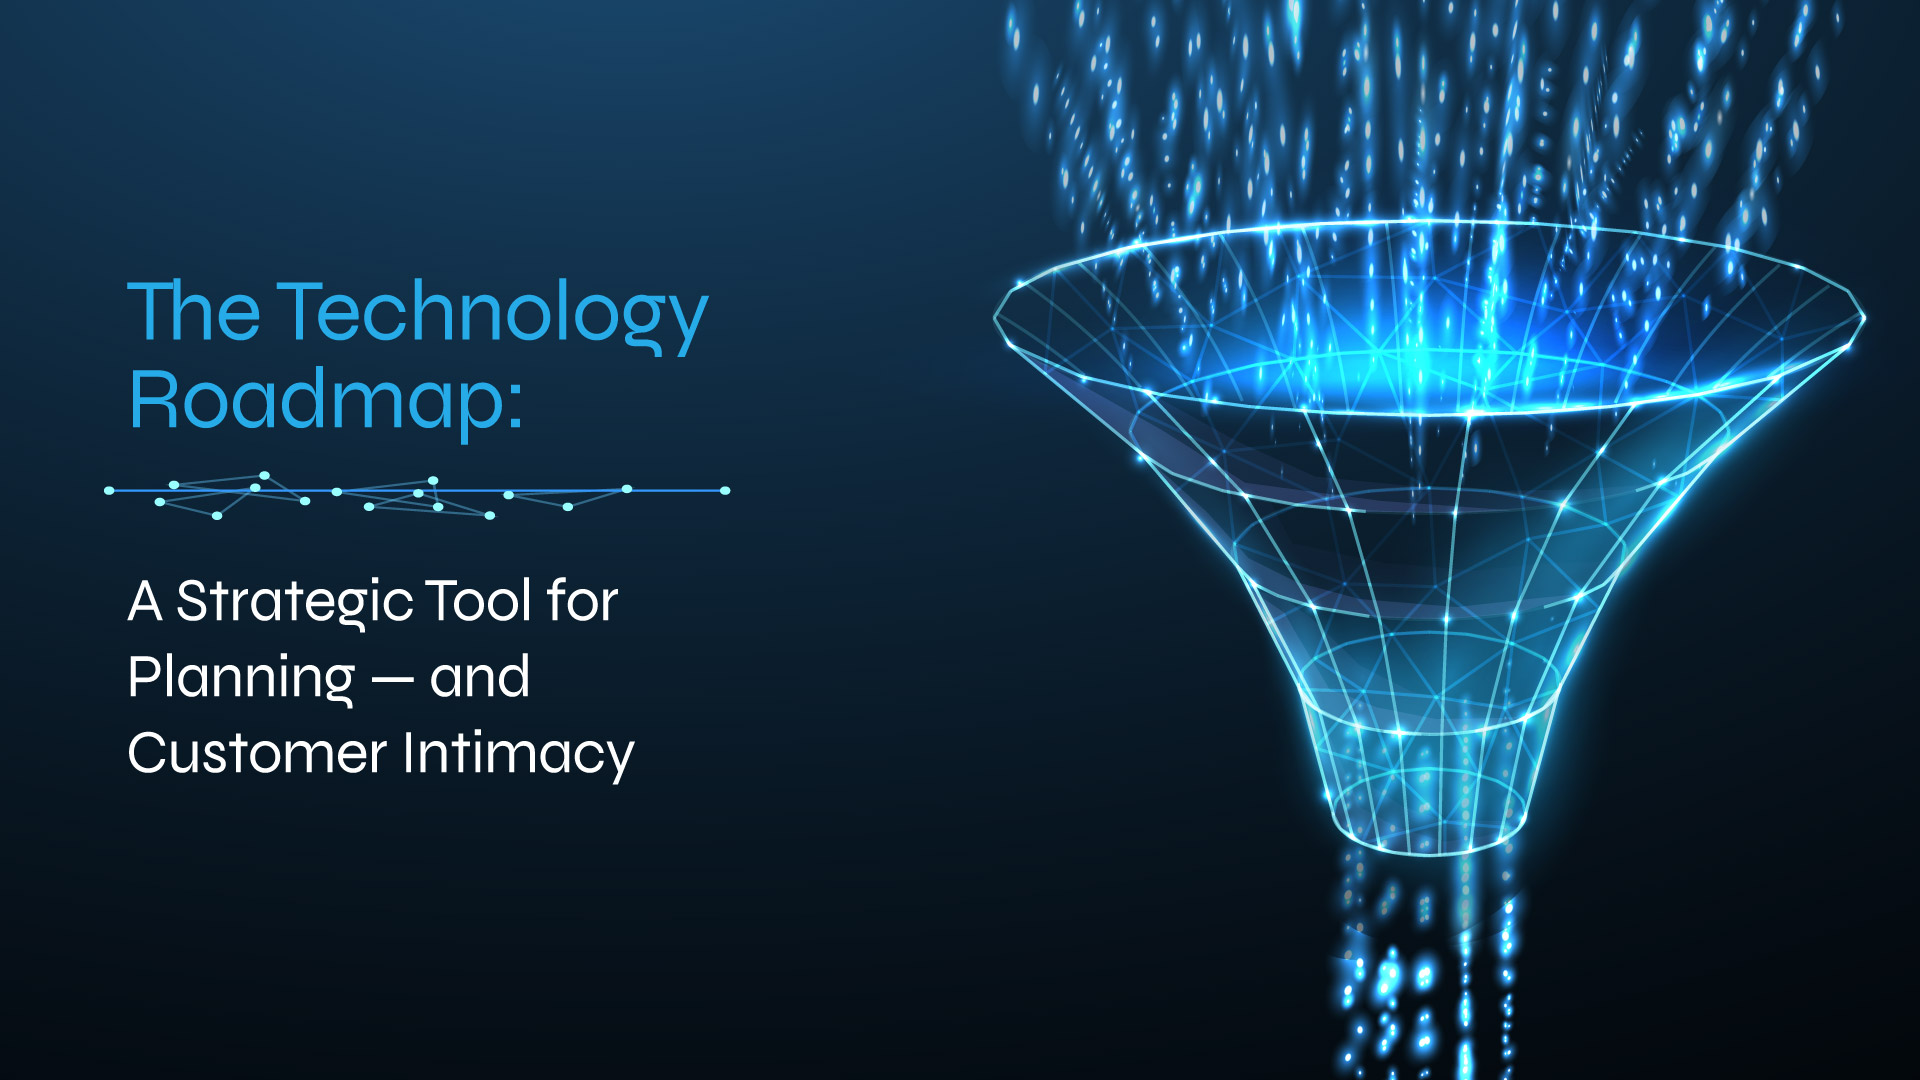 The Technology Roadmap: A Strategic Tool for Planning and Customer Intimacy